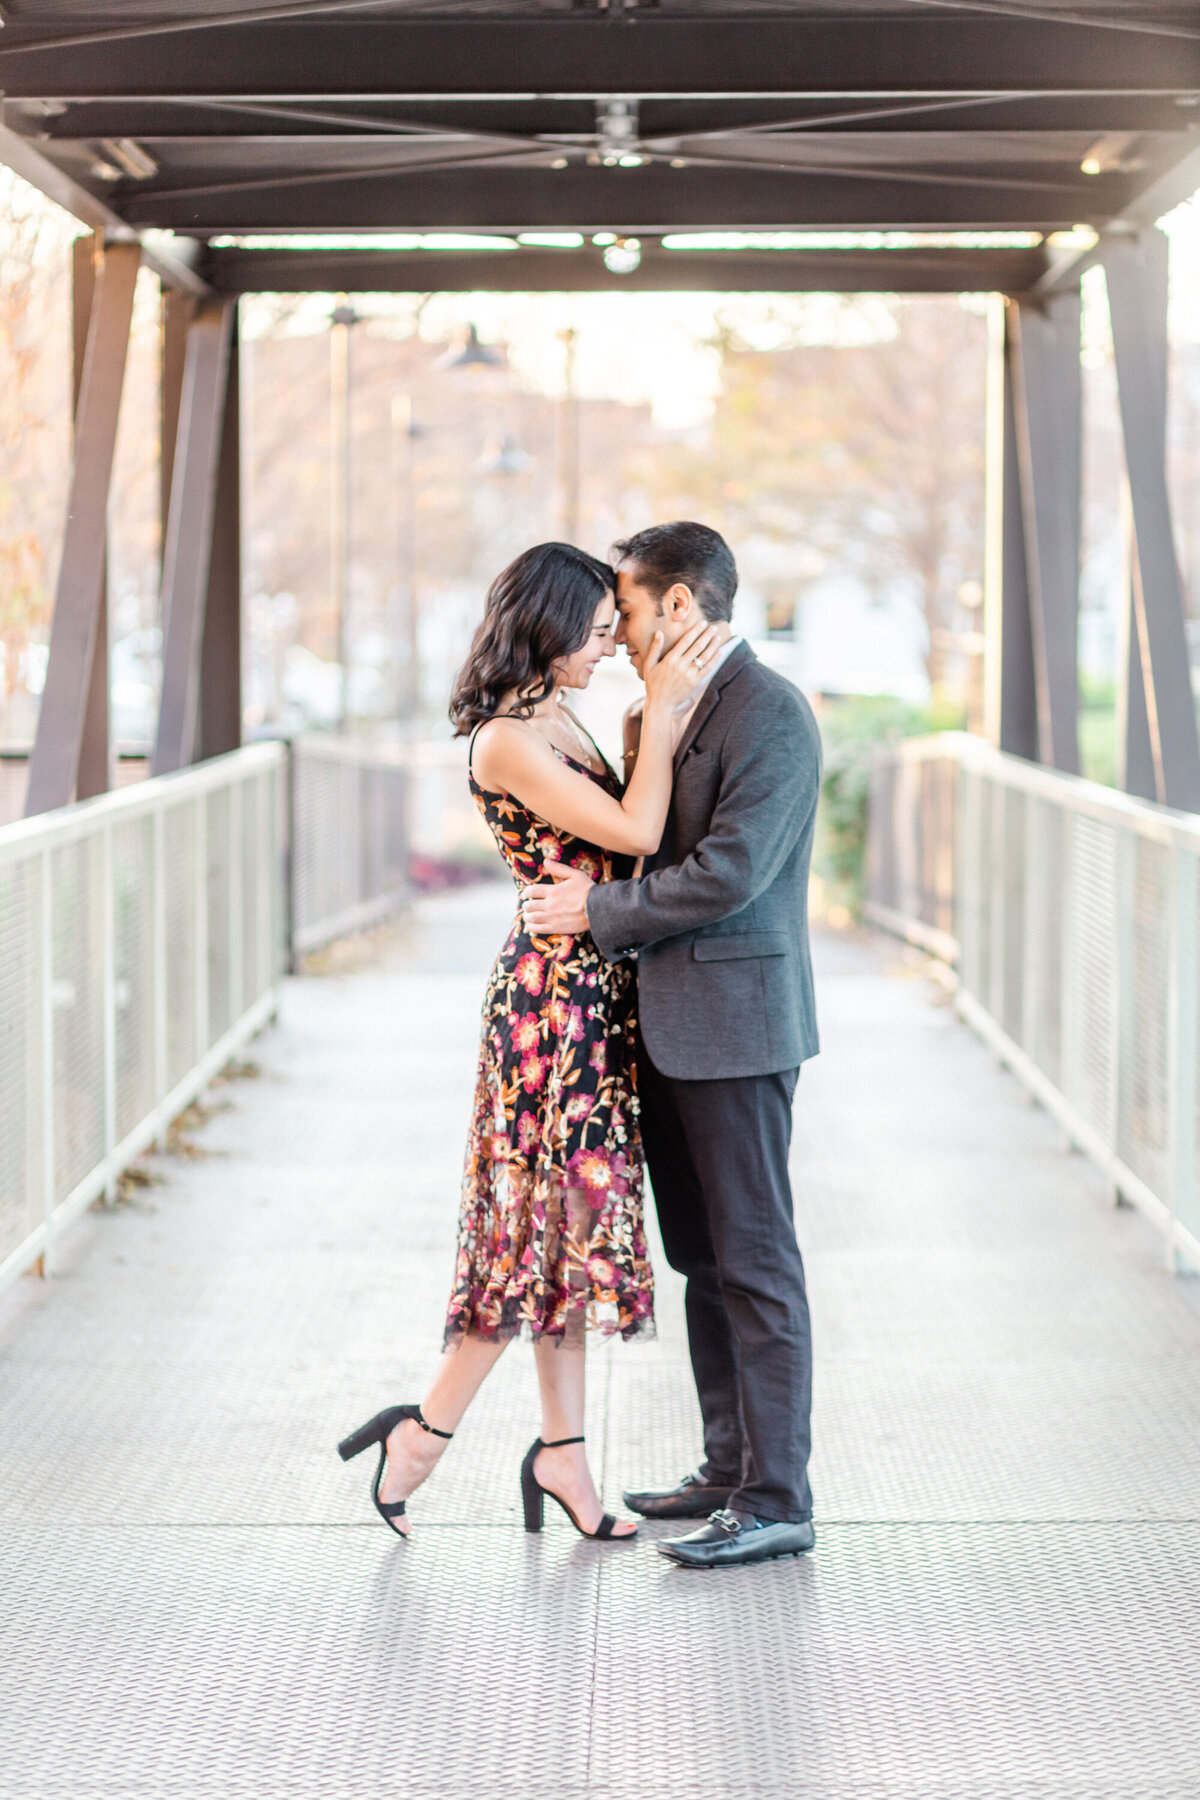 Jessica Chole Photography San Antonio Texas California Wedding Portrait Engagement Maternity Family Lifestyle Photographer Souther Cali TX CA Light Airy Bright Colorful Photography8